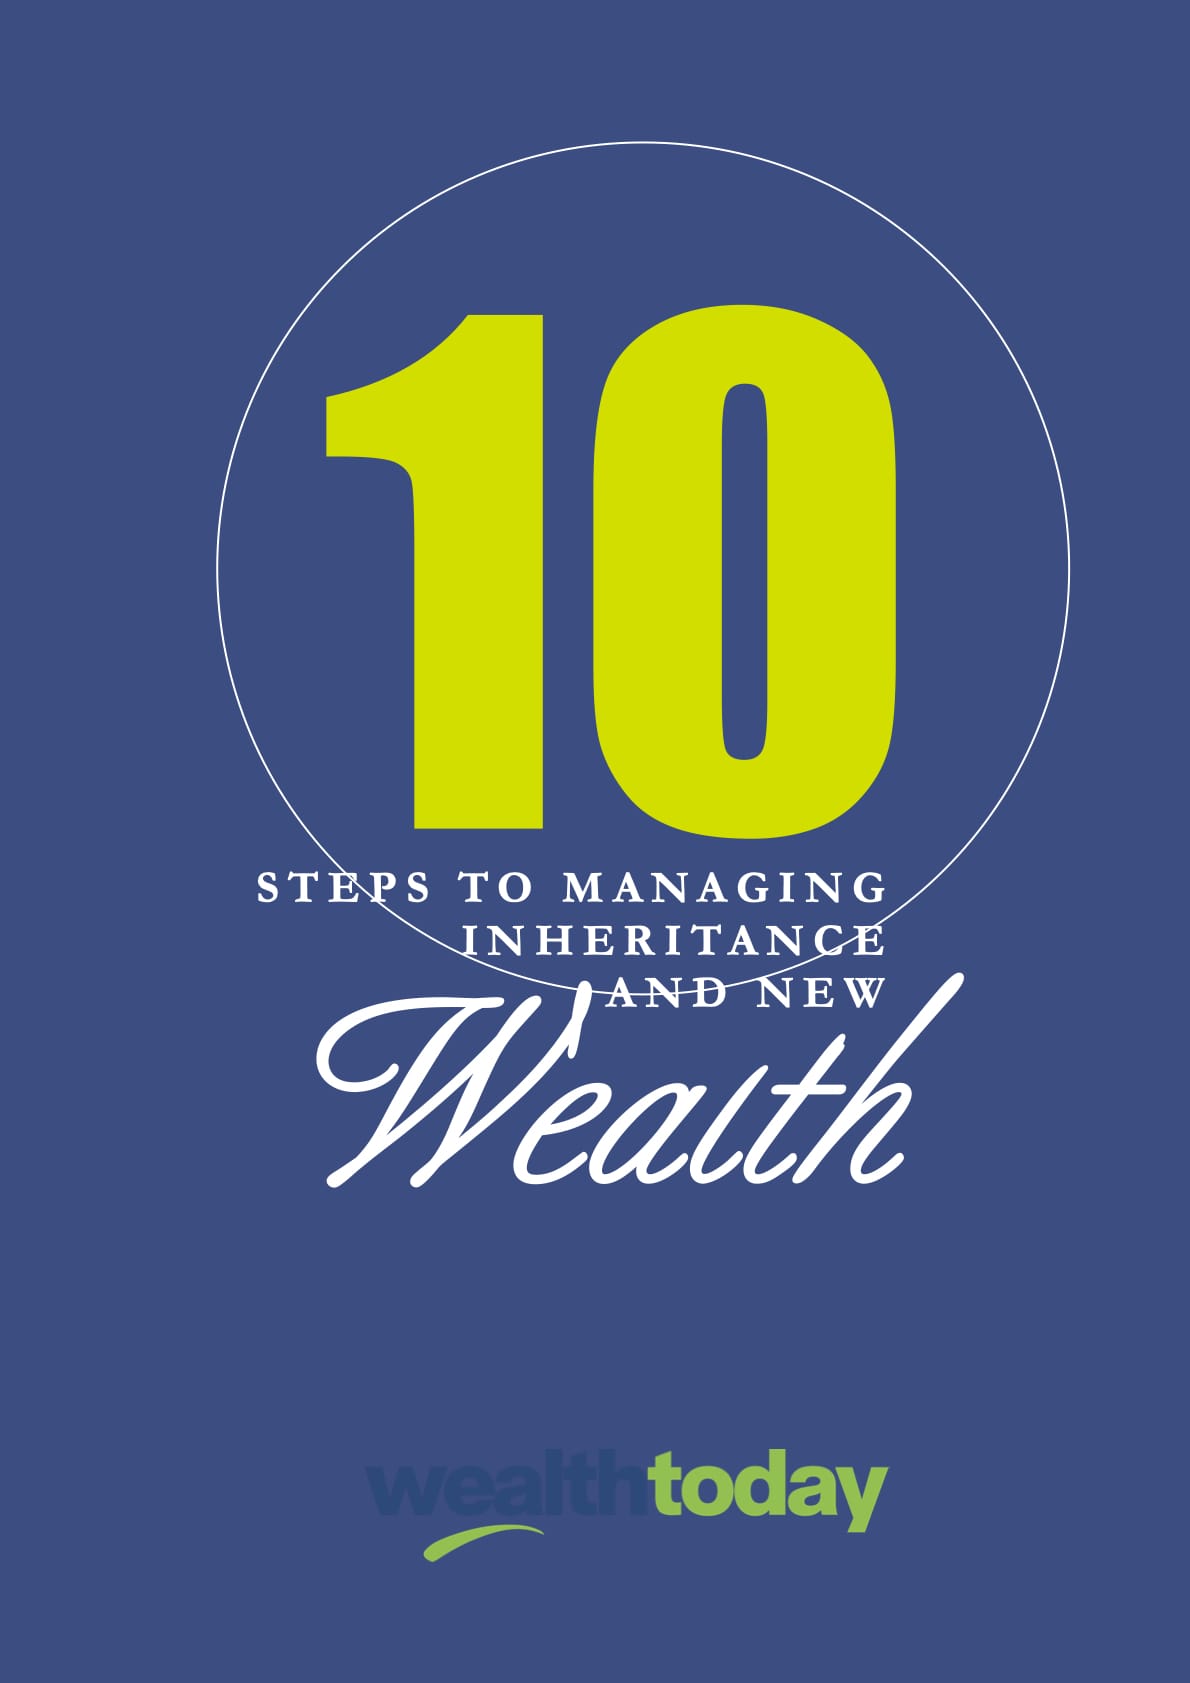 10-steps-to-managing-inheritance-and-new-wealth-WT-editing